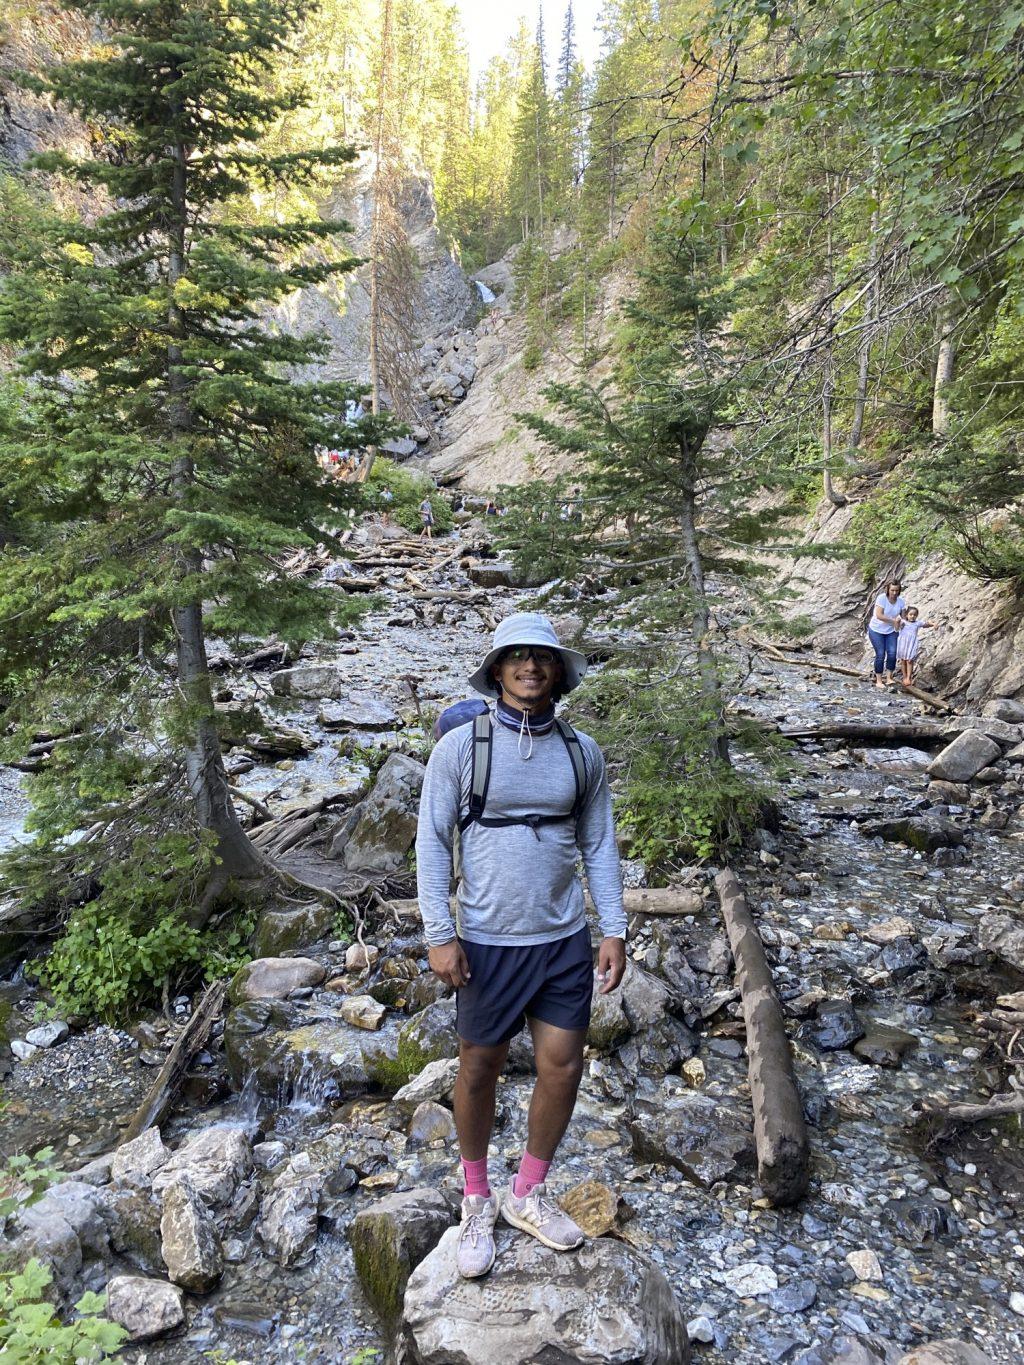 Quincy McAfee stops for a photo while crossing a rocky bank on a hike in Salt Lake City, Utah, on July 19. McAfee ventured on a road trip with Pepperdine Baseball alum Cory Wills this summer. Photo courtesy of Quincy McAfee